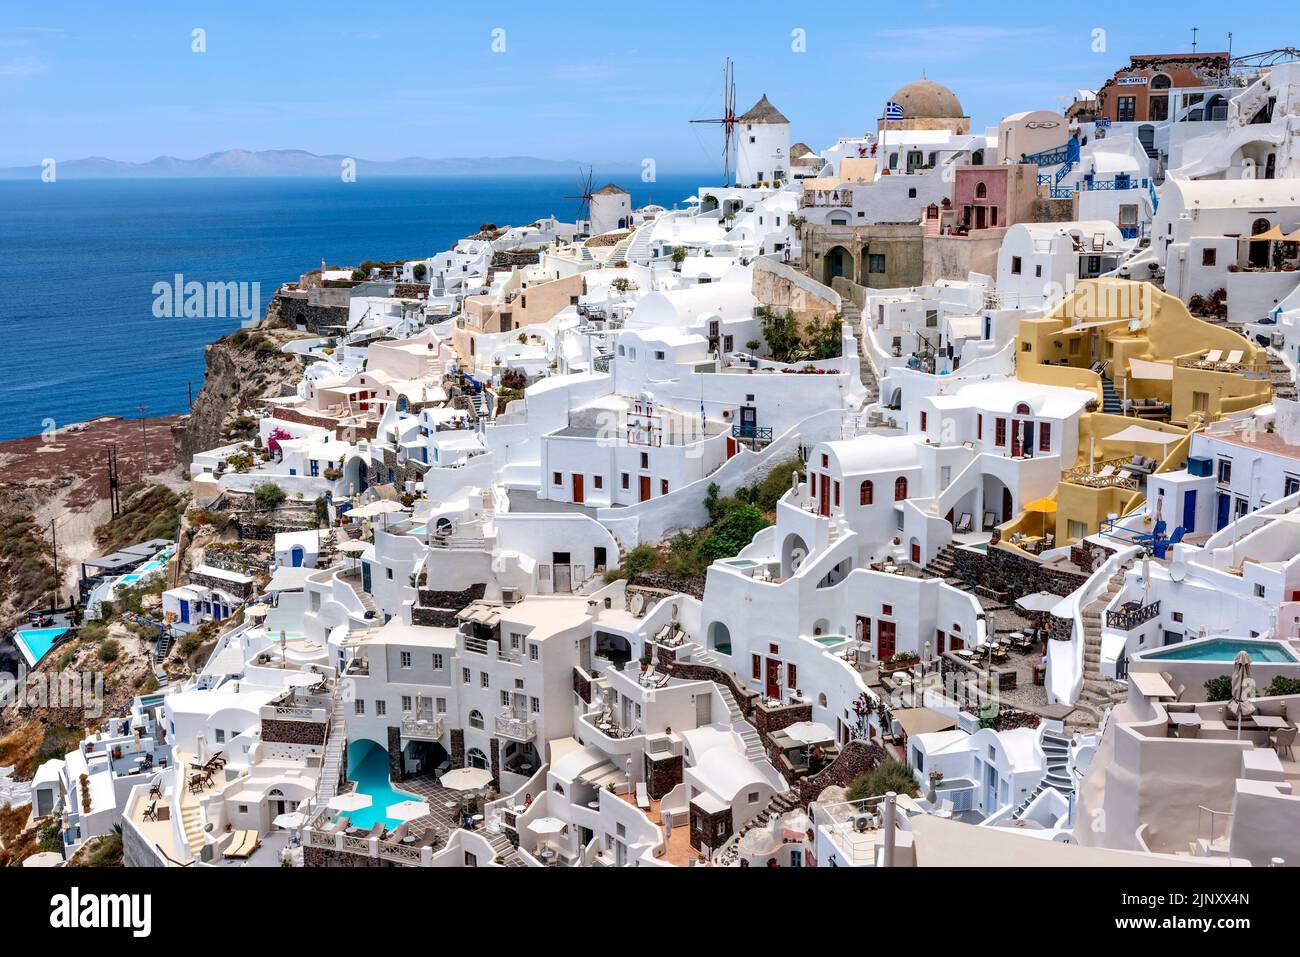 A View Of The Town Of Oia On The Island Of Santorini, Greek Islands, Greece. Stock Photo